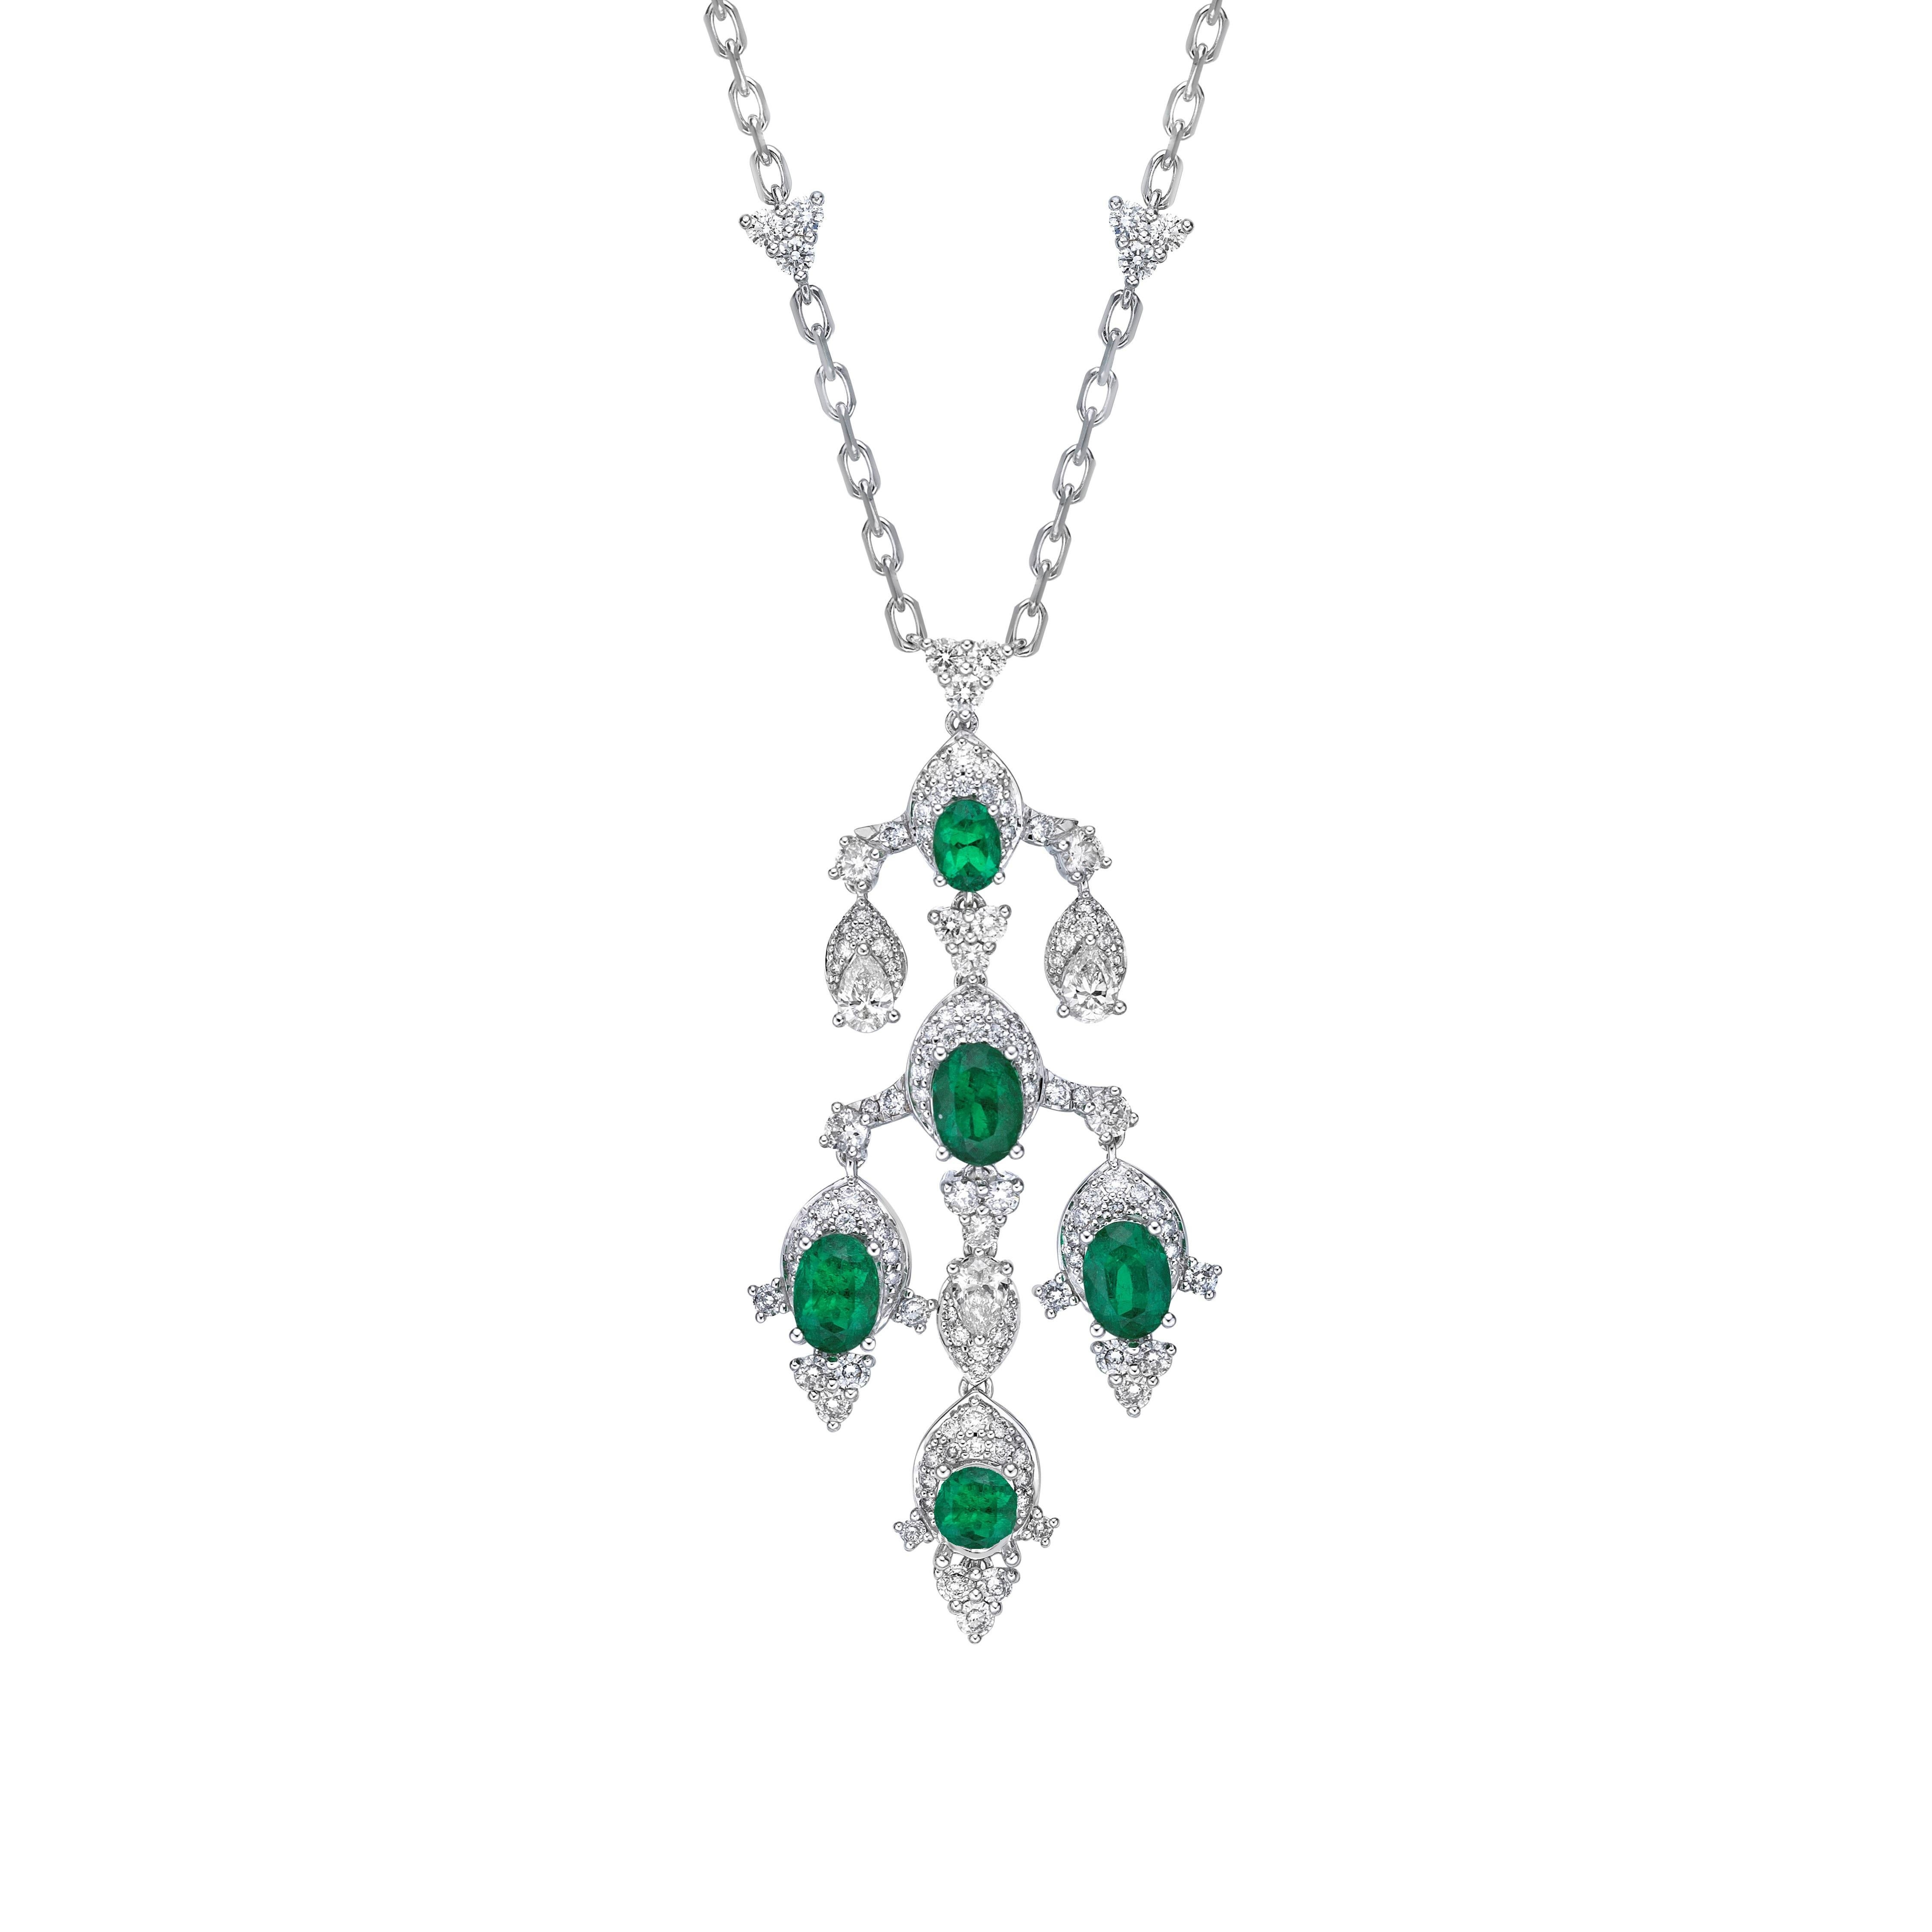 Oval Cut Contemporary Emerald and Diamond Necklace in 18Karat White Gold. For Sale